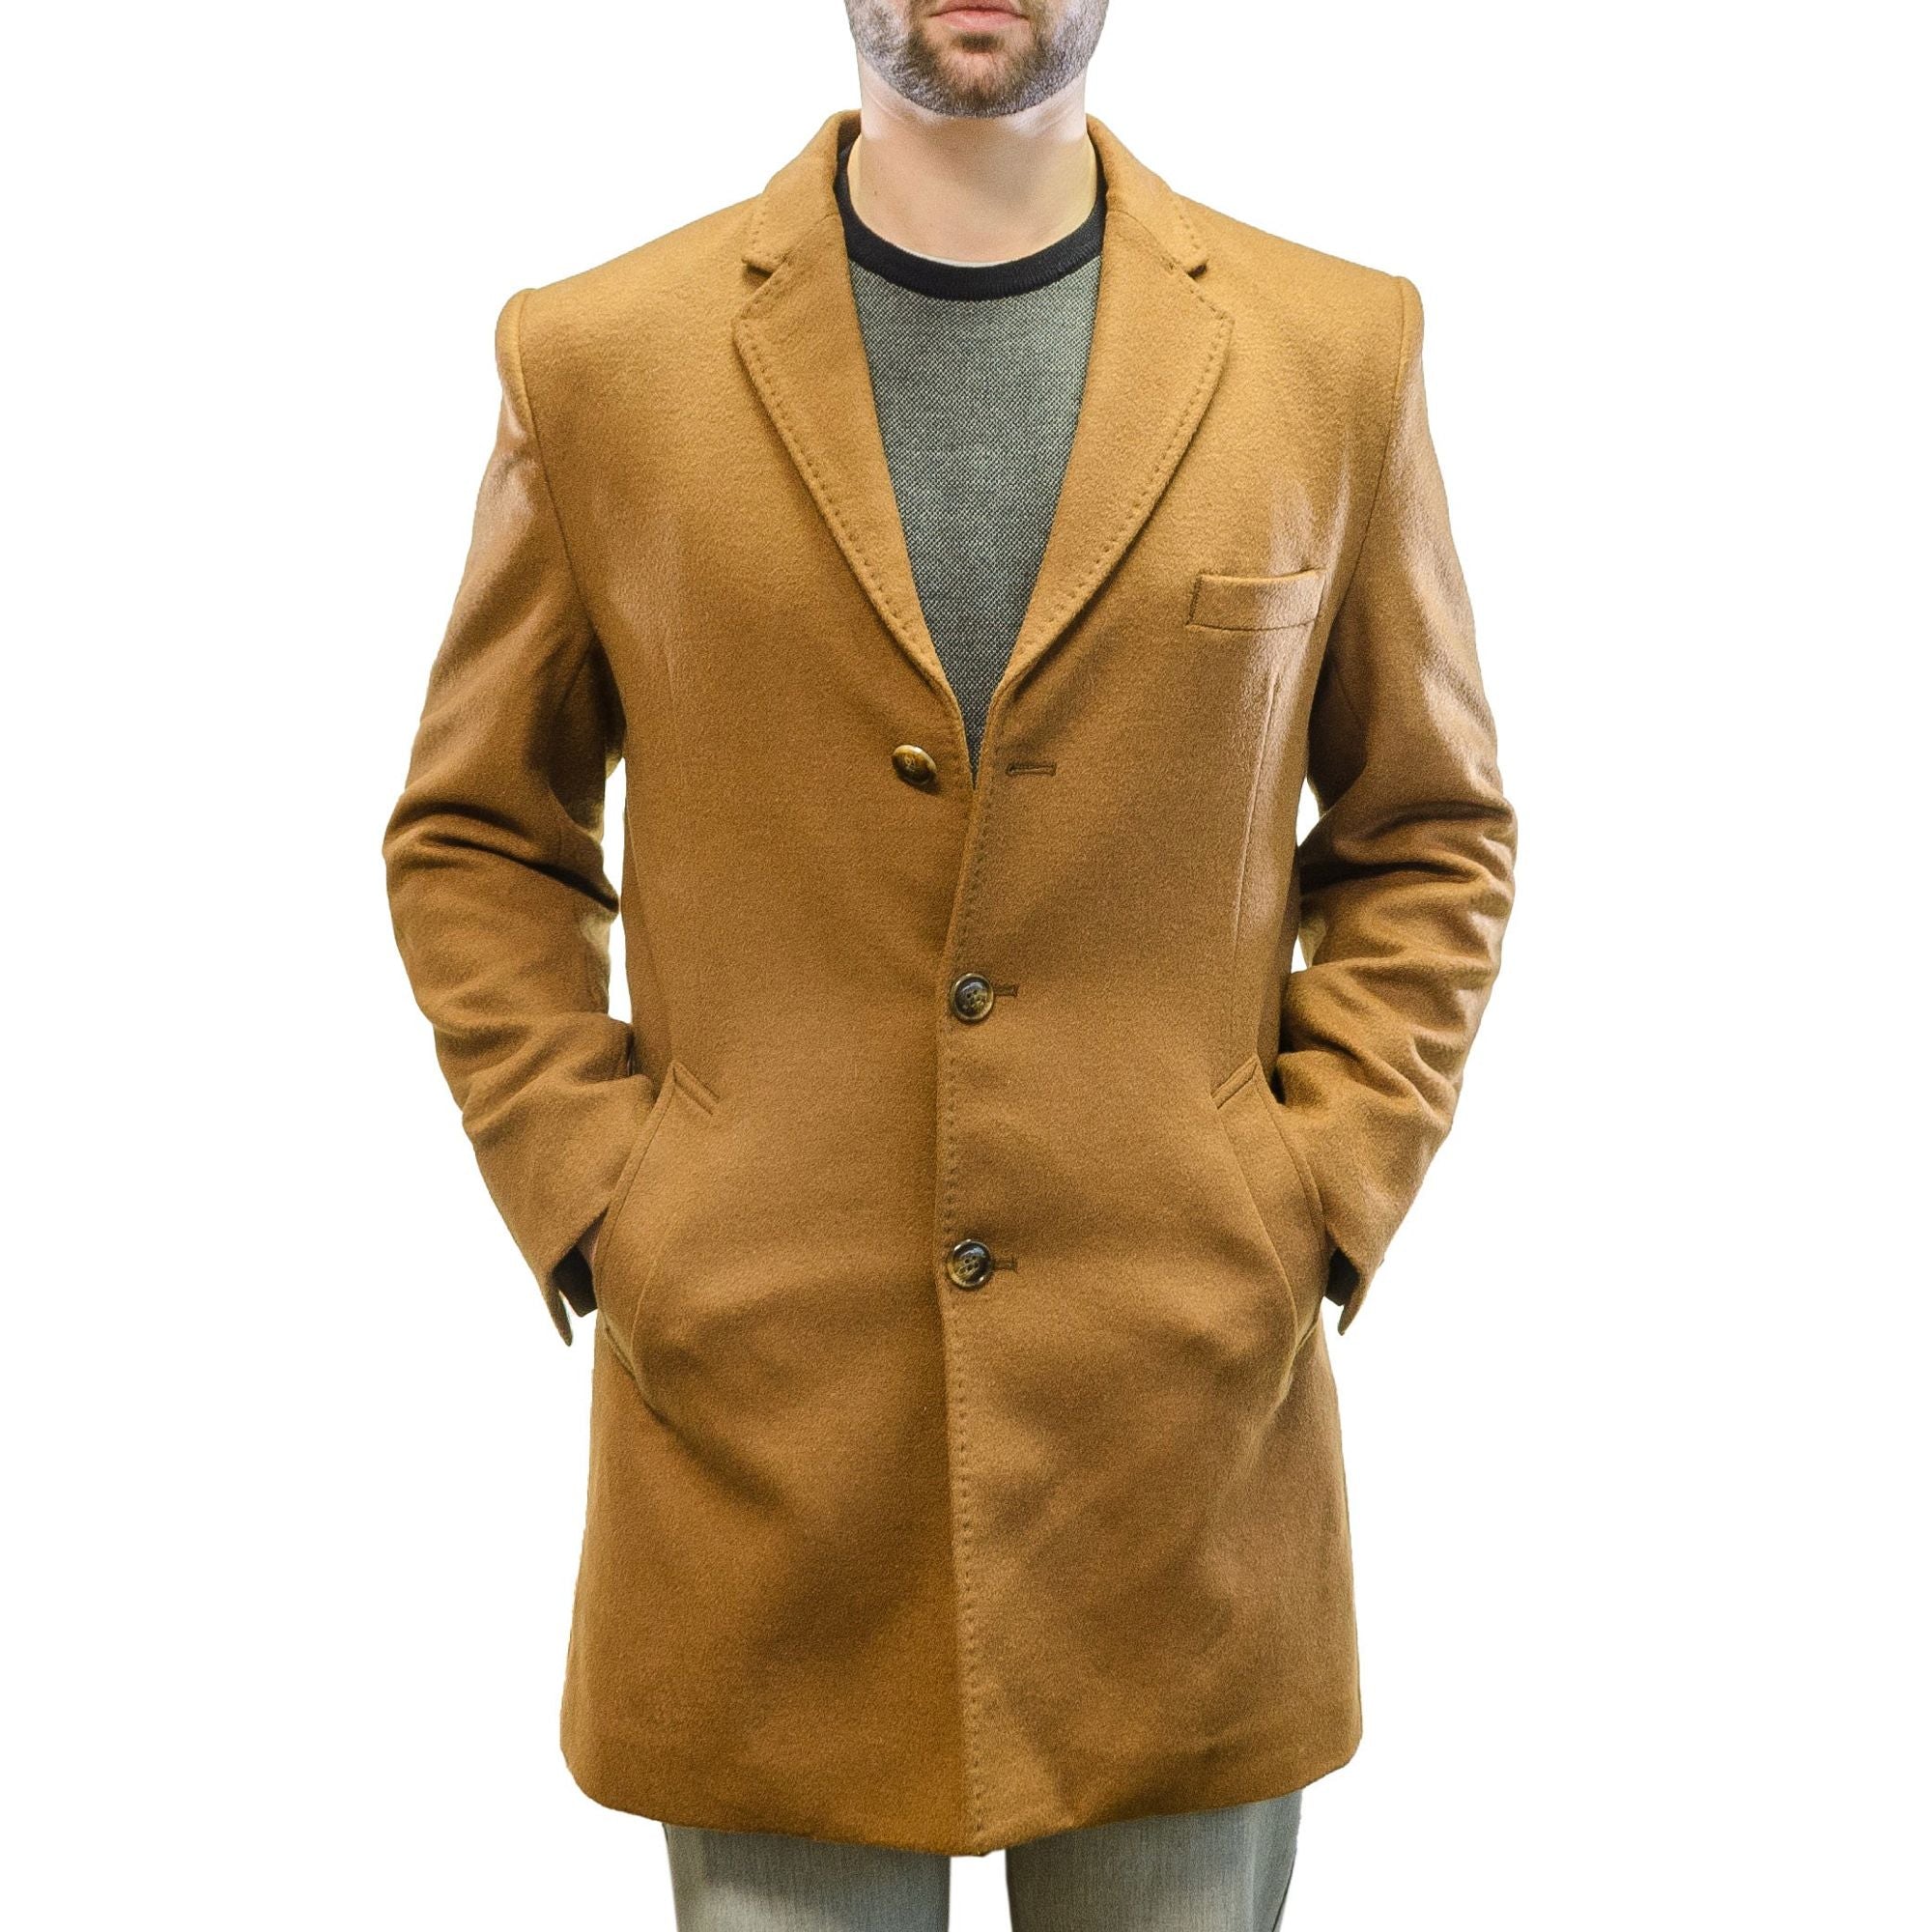 Wool Blend 3 Button Coat in Camel by Viyella